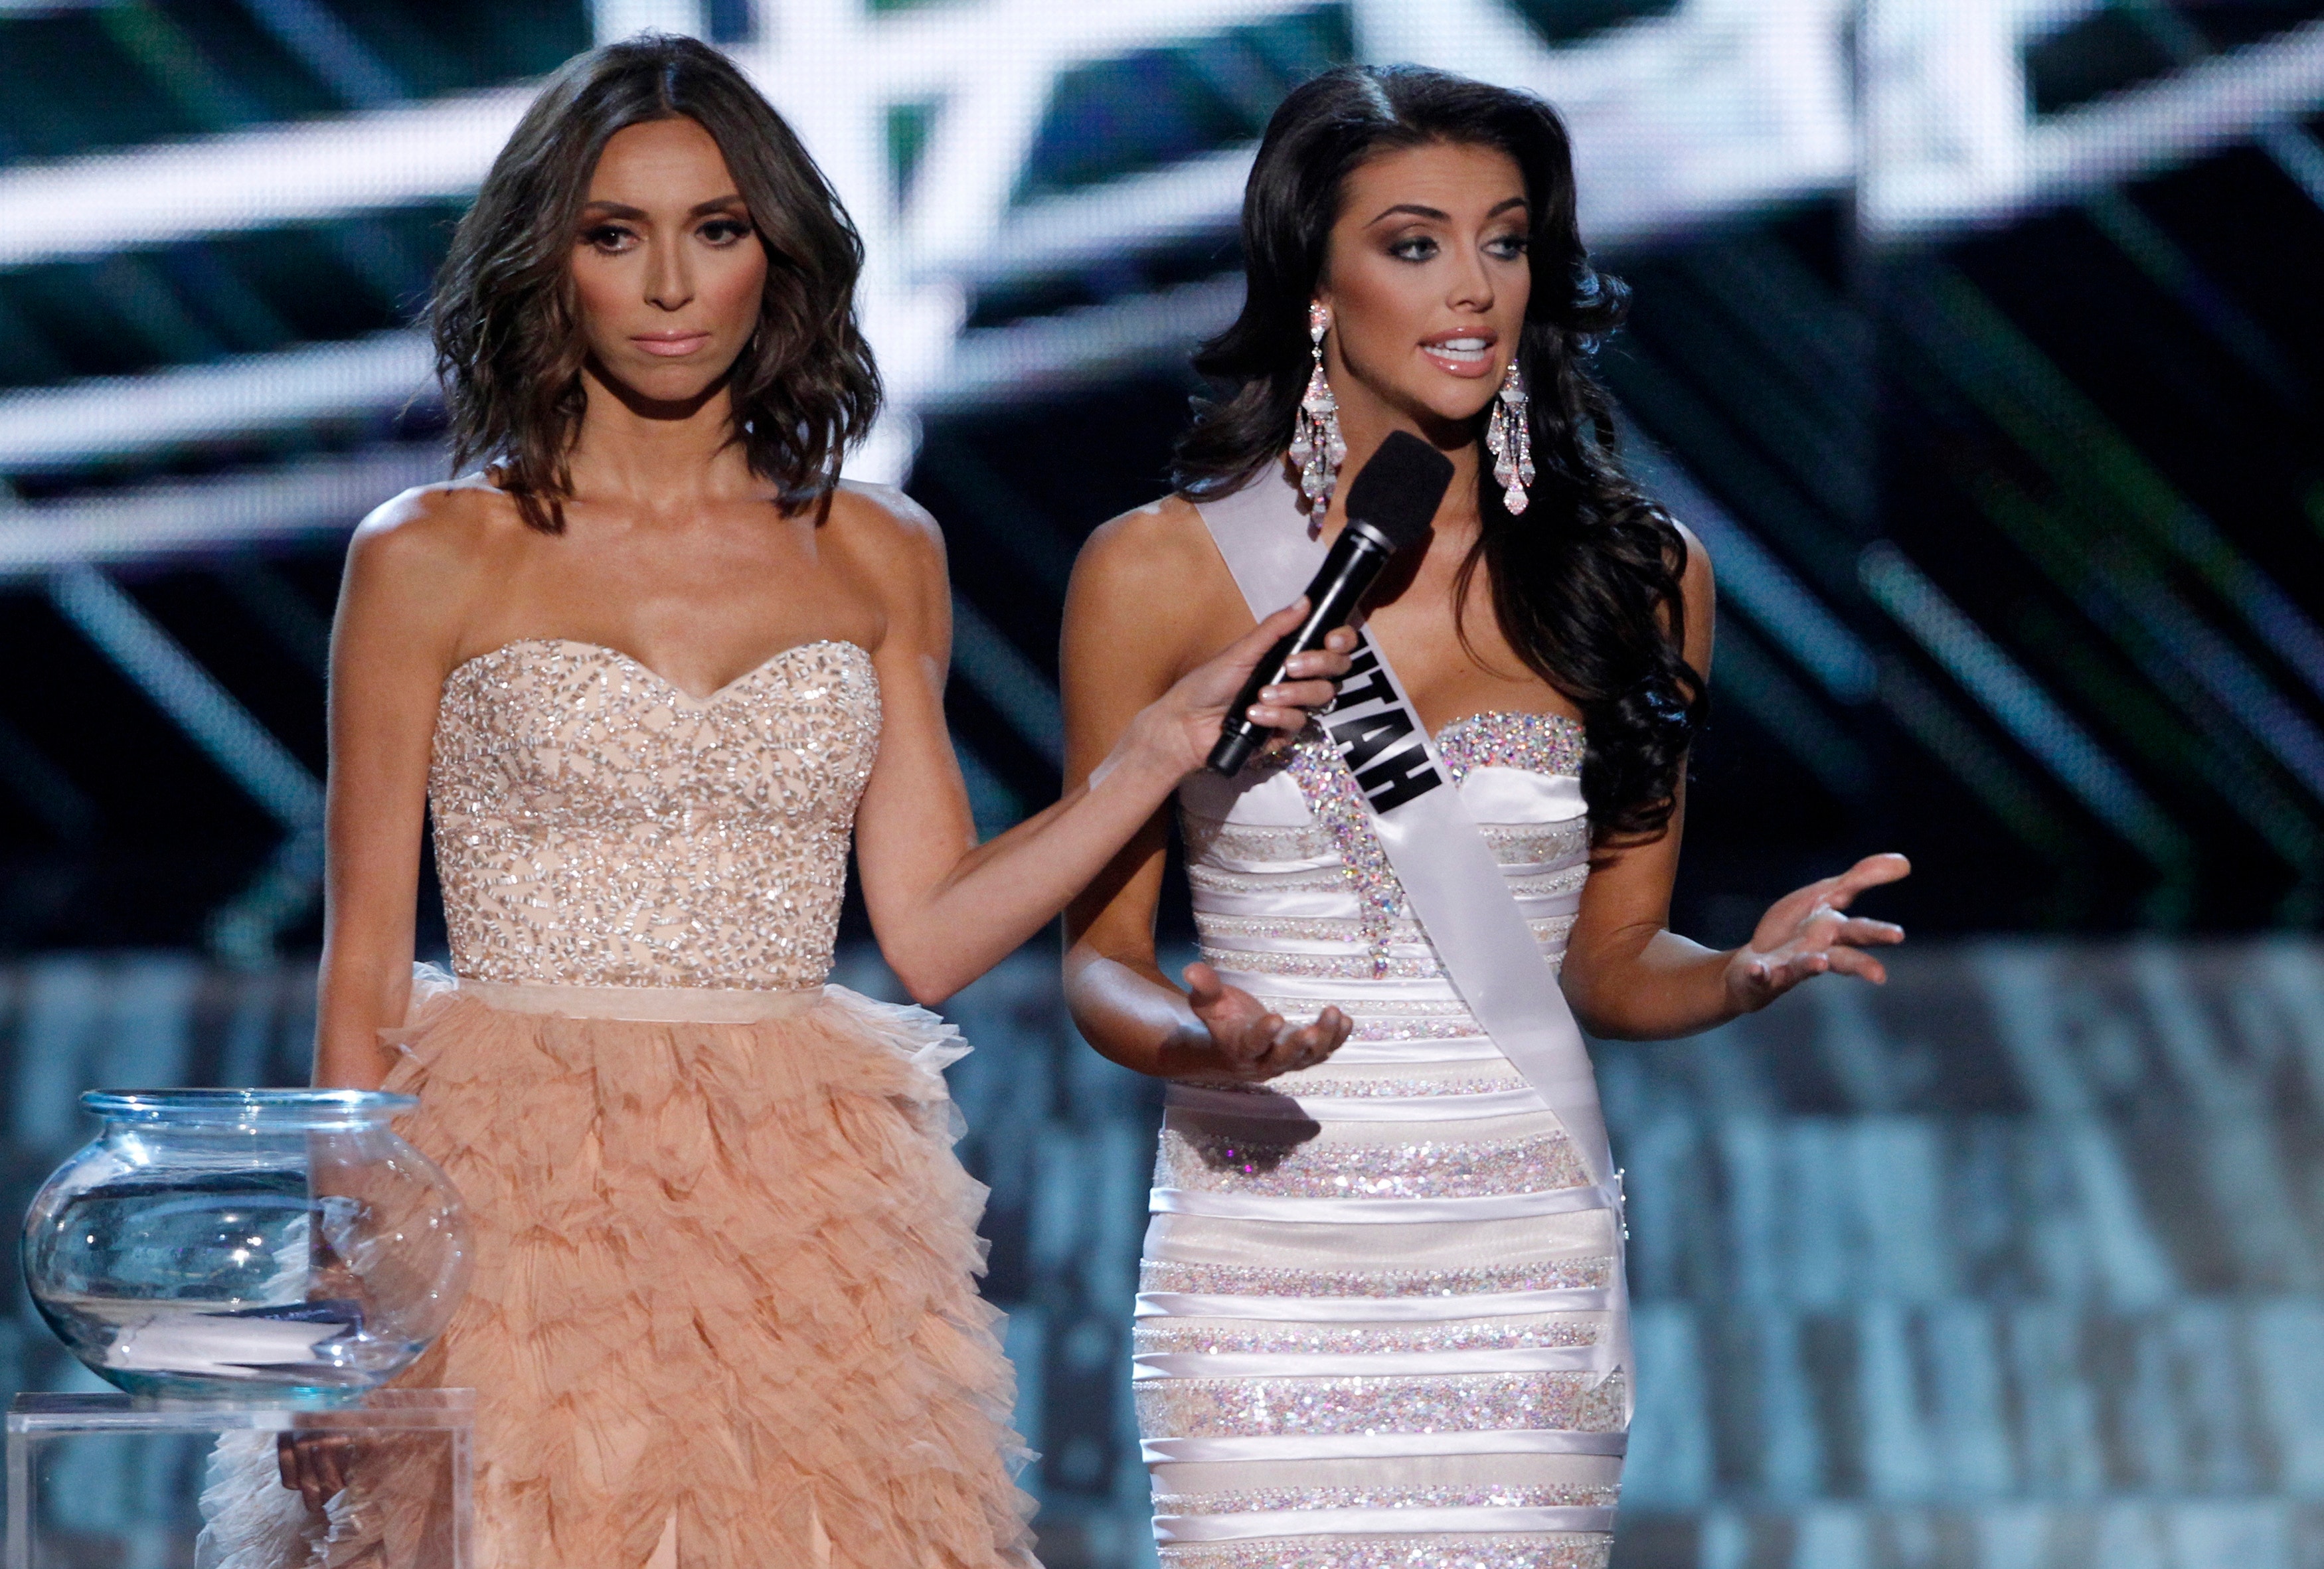 'Create education better' Miss Utah botches answer at Miss USA pageant